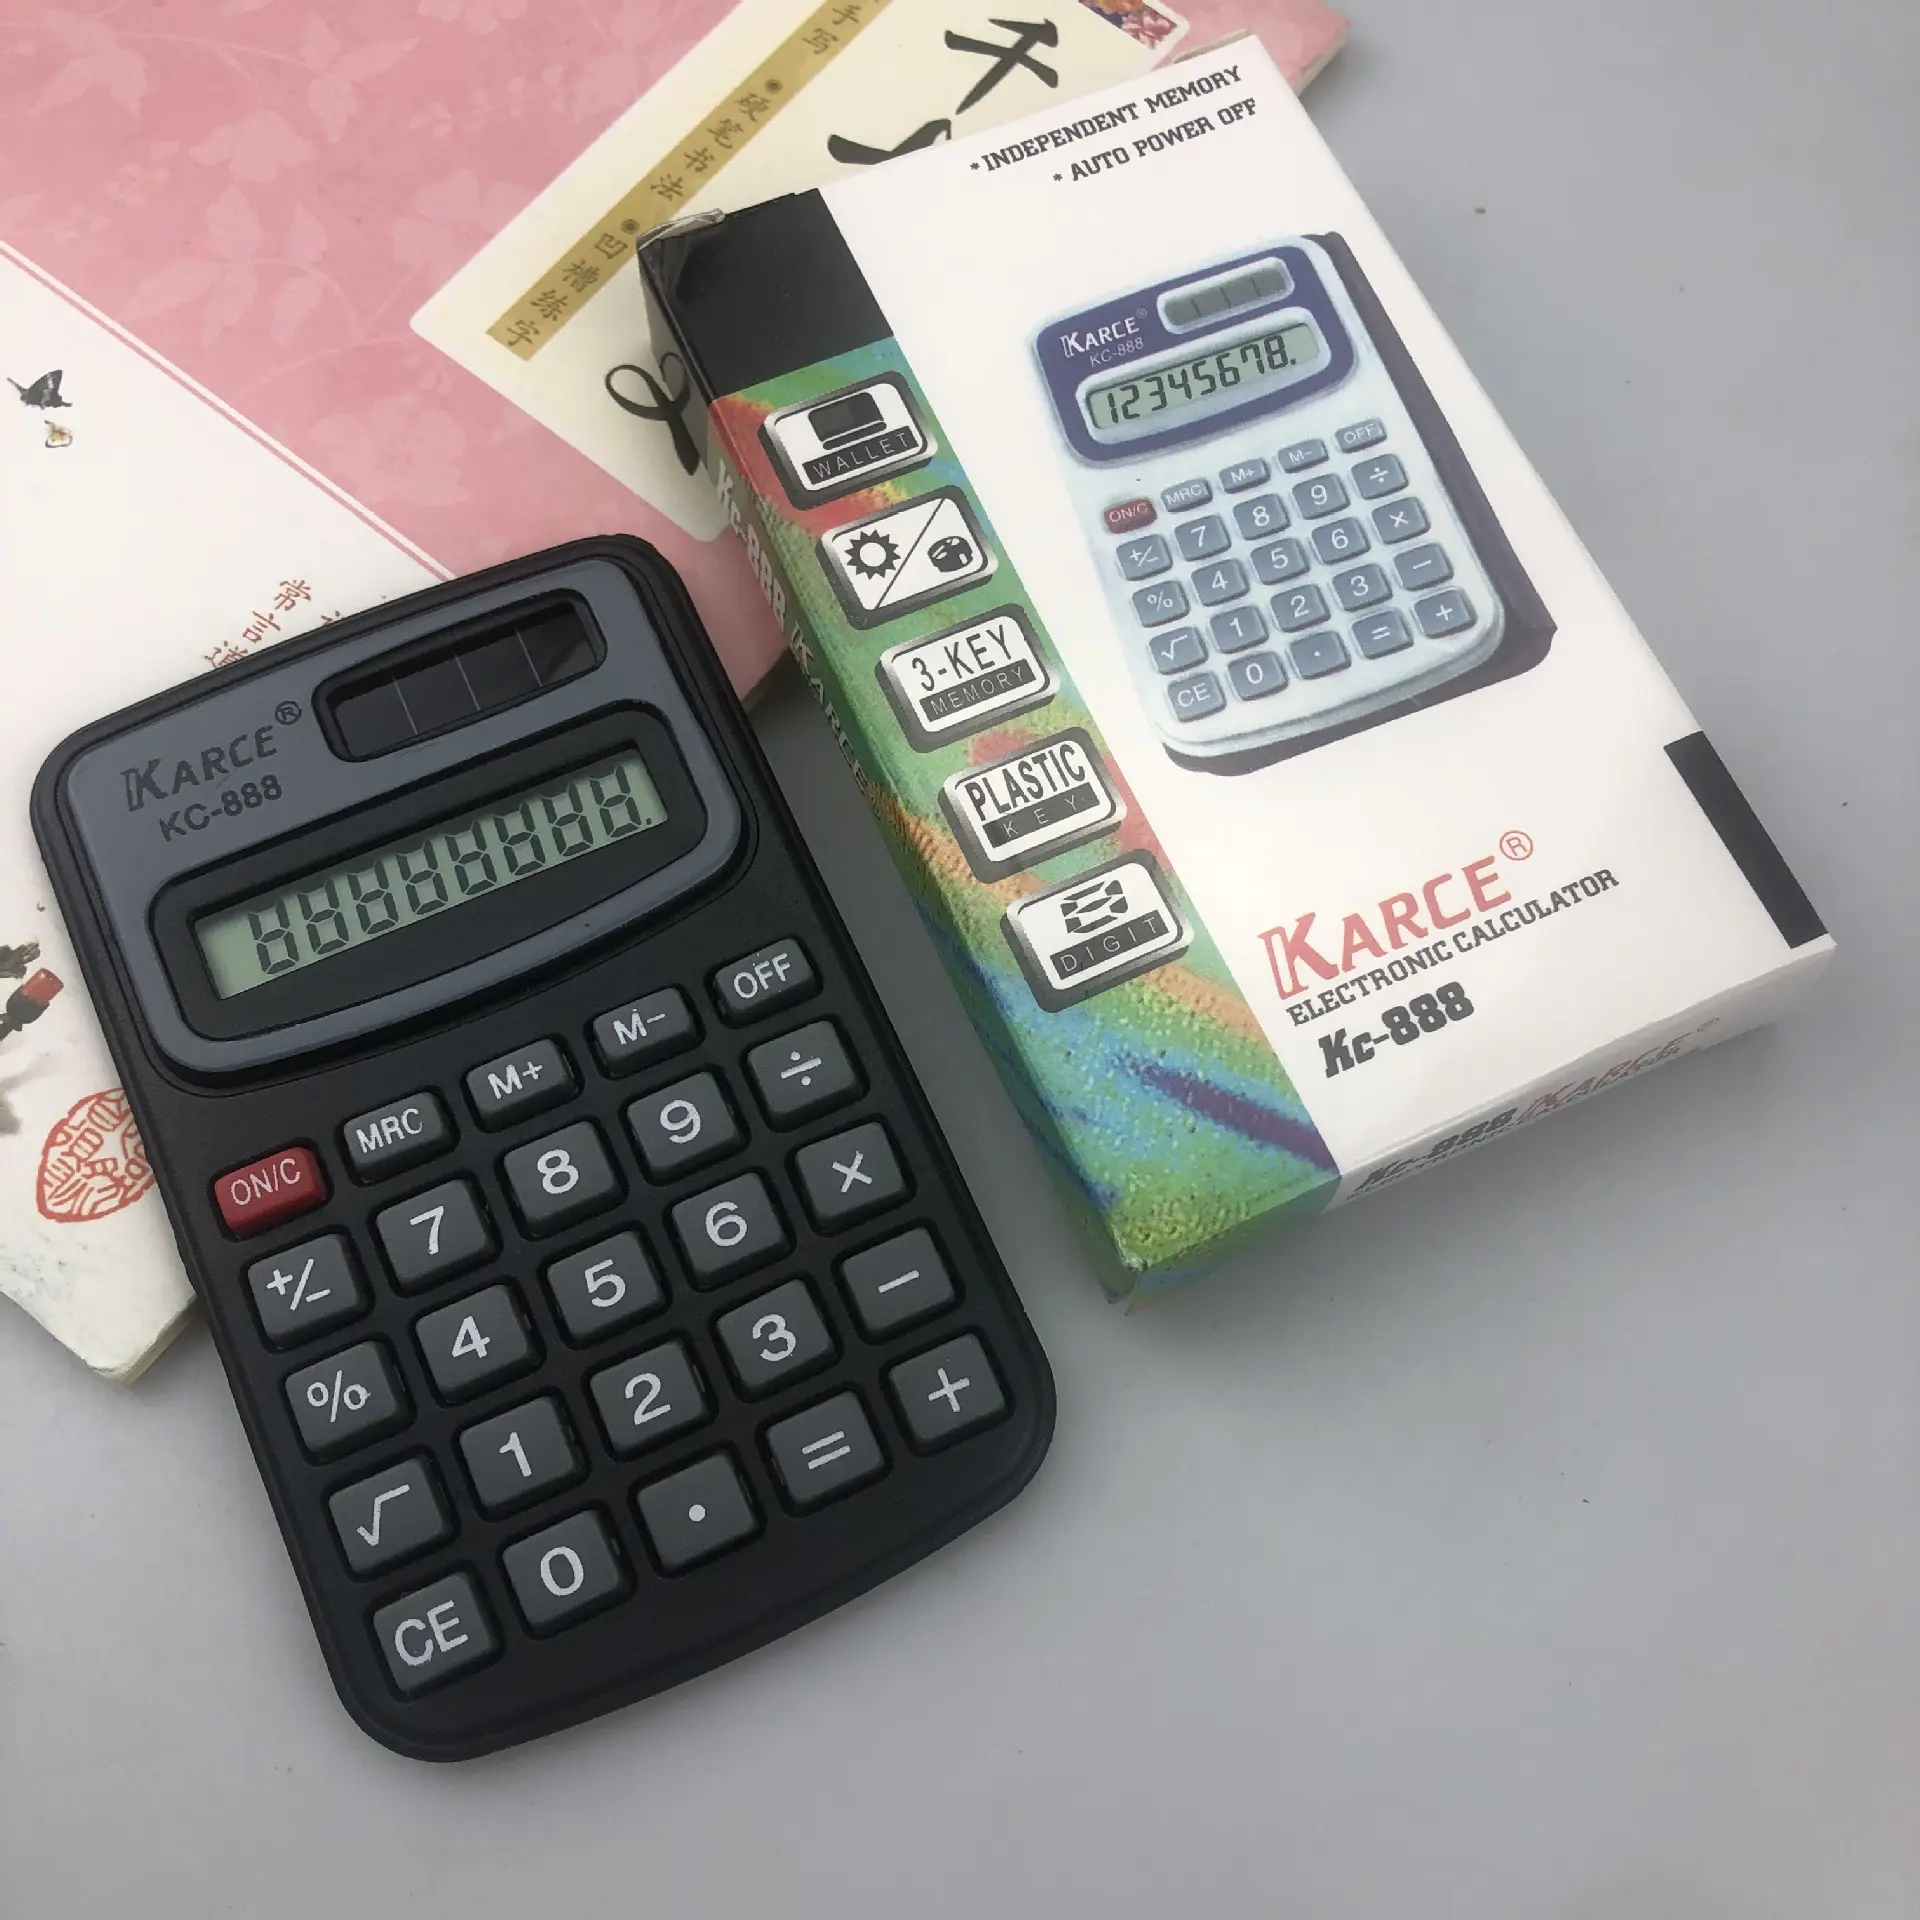 Epsilon Factory Price Promotion Gift 8 Digit Lcd Display Rubber Calculator Kc 888 Student Small Calculator